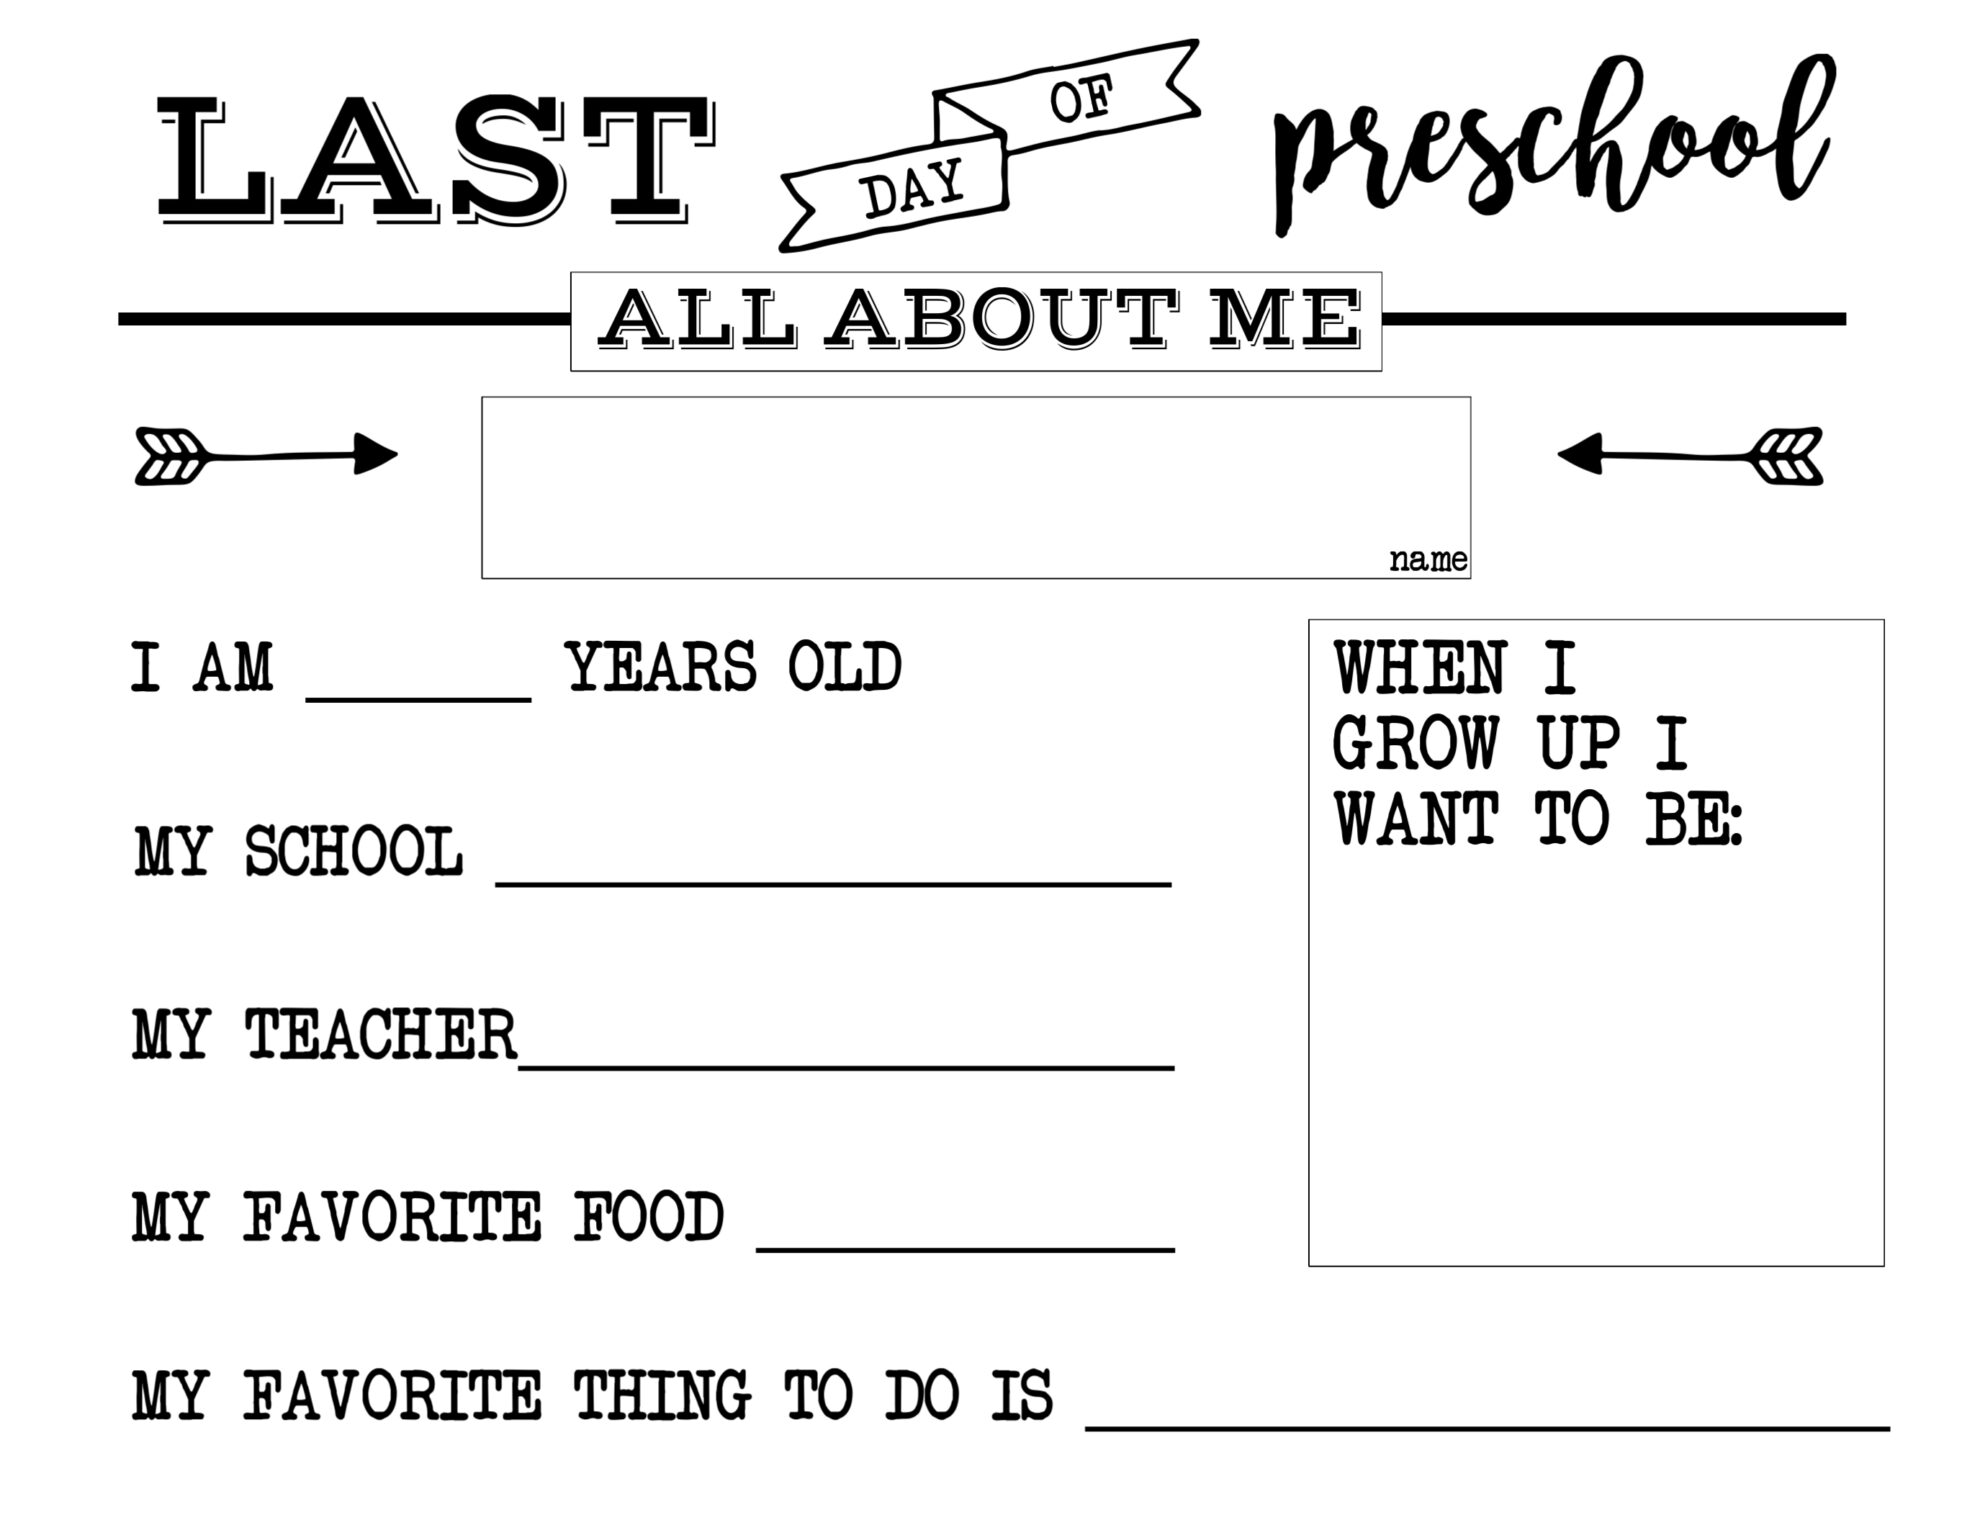 all about me preschool printable